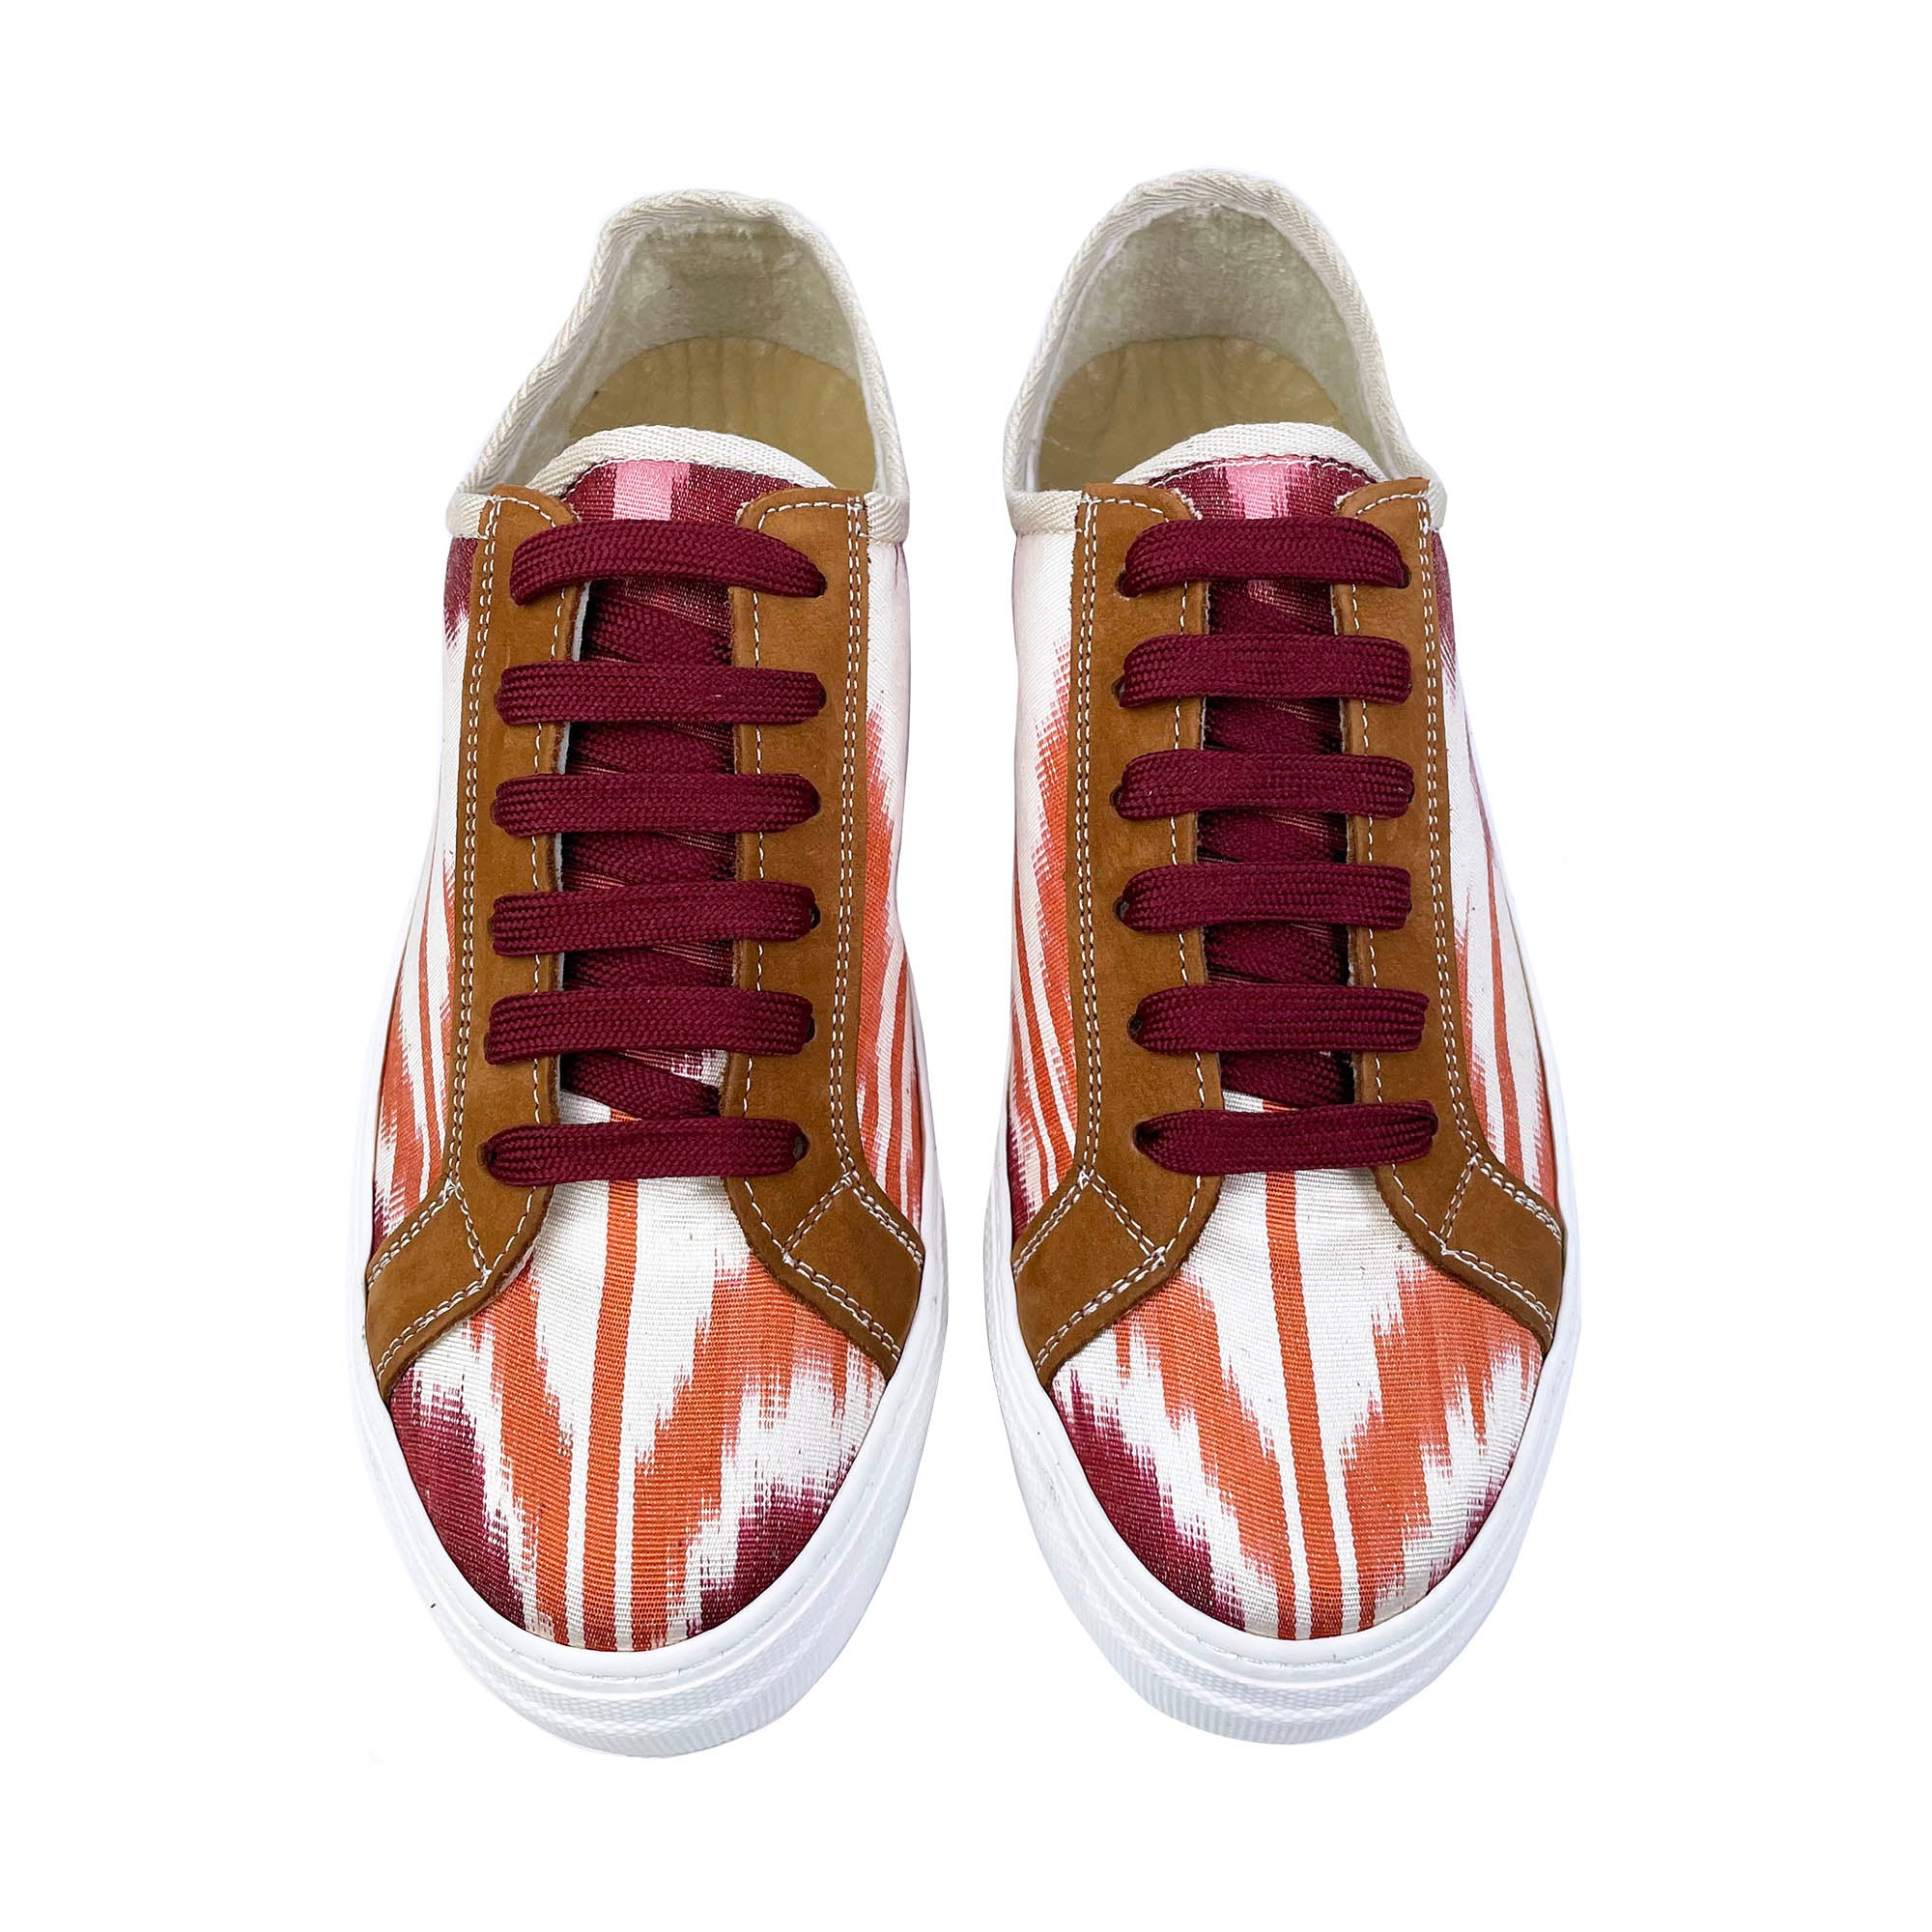 Red and orange Ikat Silk sneakers with Burgundy laces and tan leather